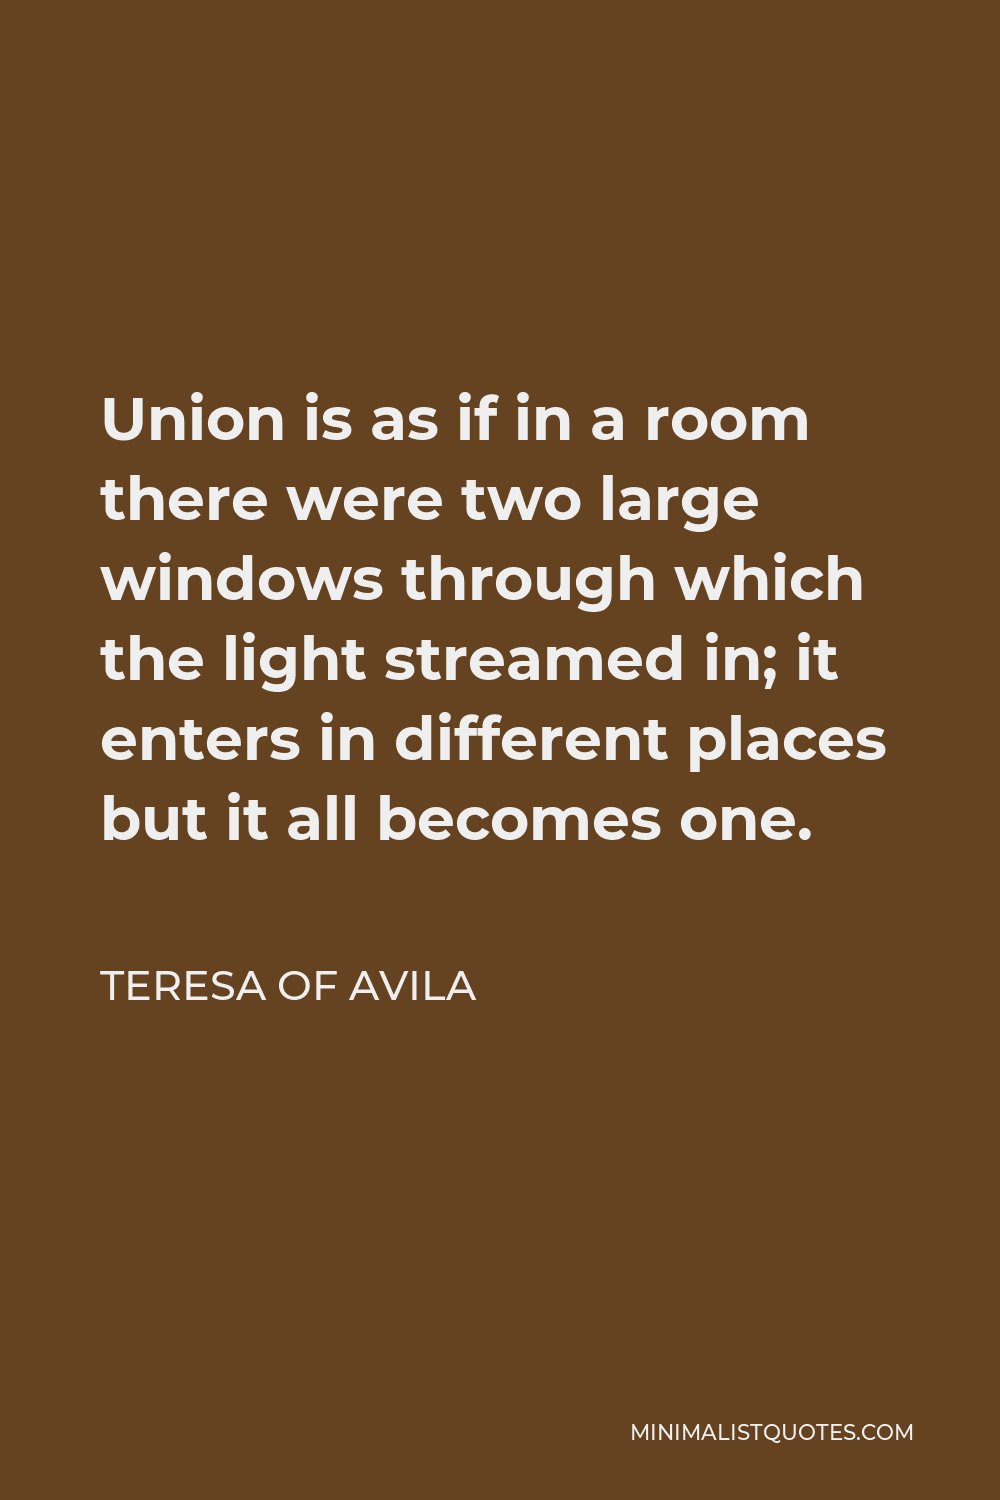 Teresa of Avila Quote - Union is as if in a room there were two large windows through which the light streamed in; it enters in different places but it all becomes one.